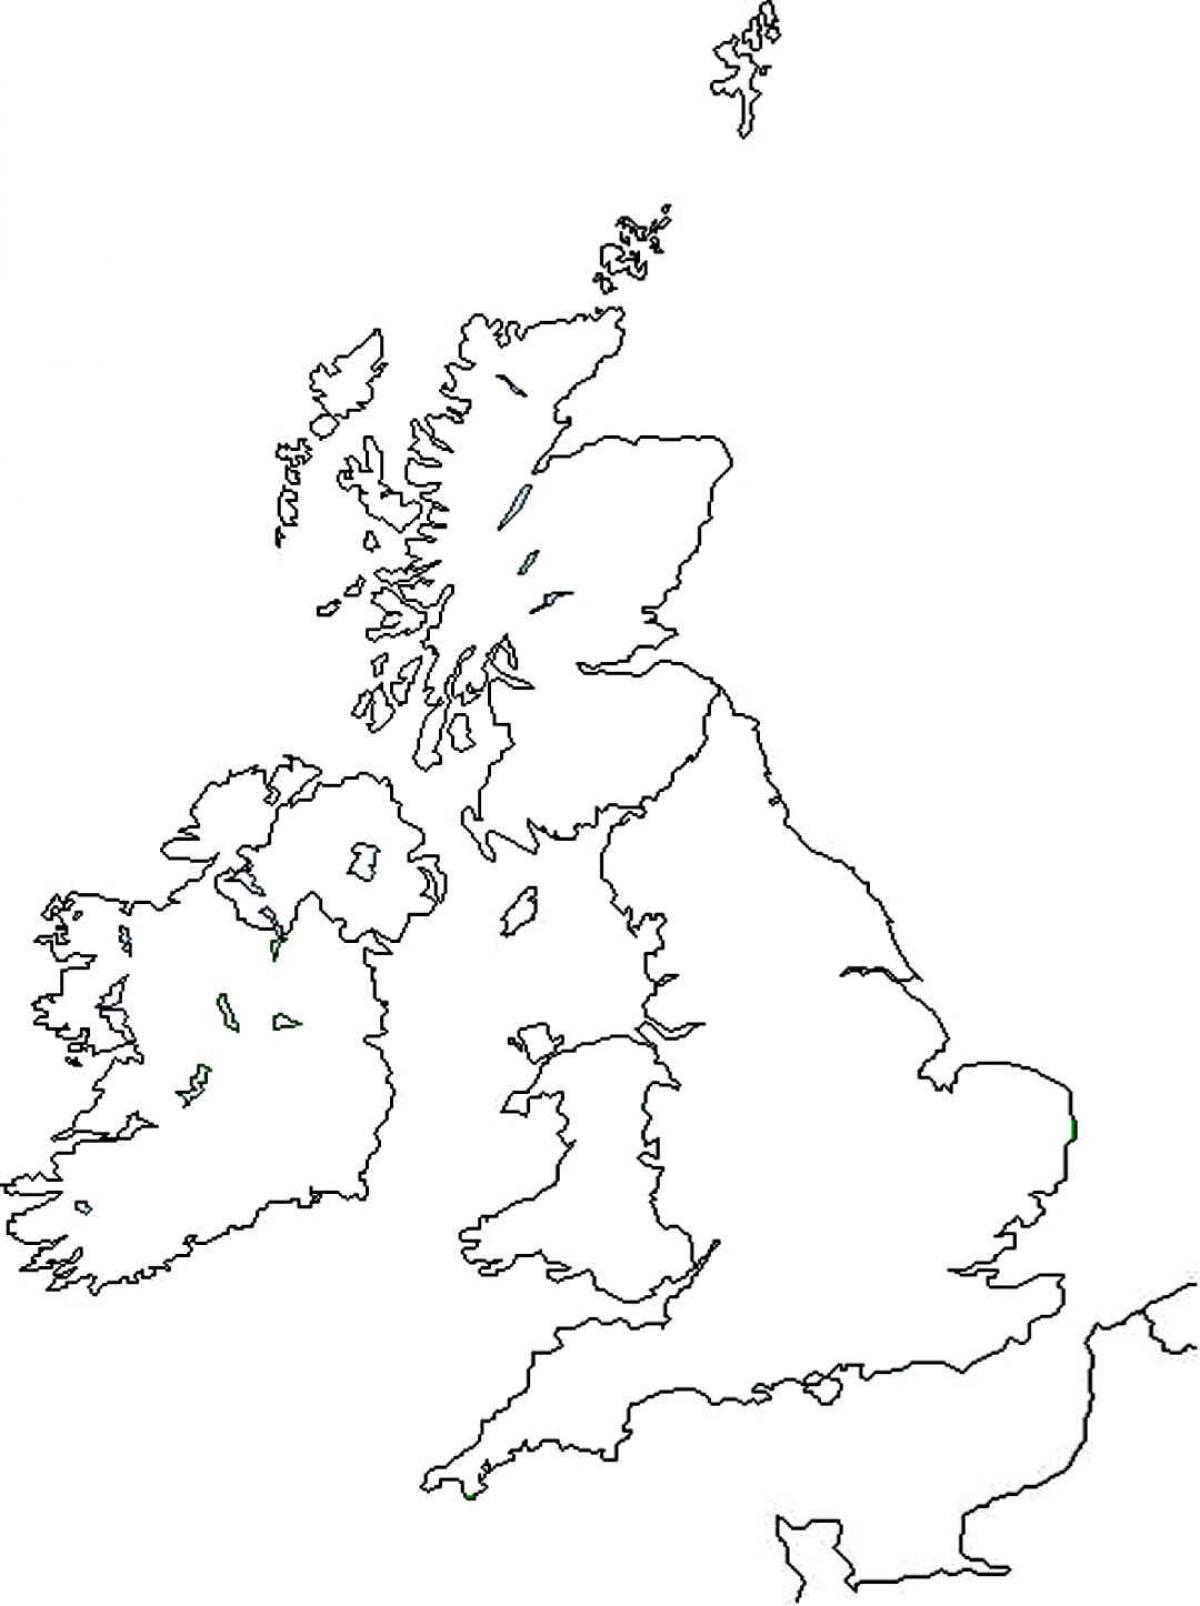 Great Britain map outline